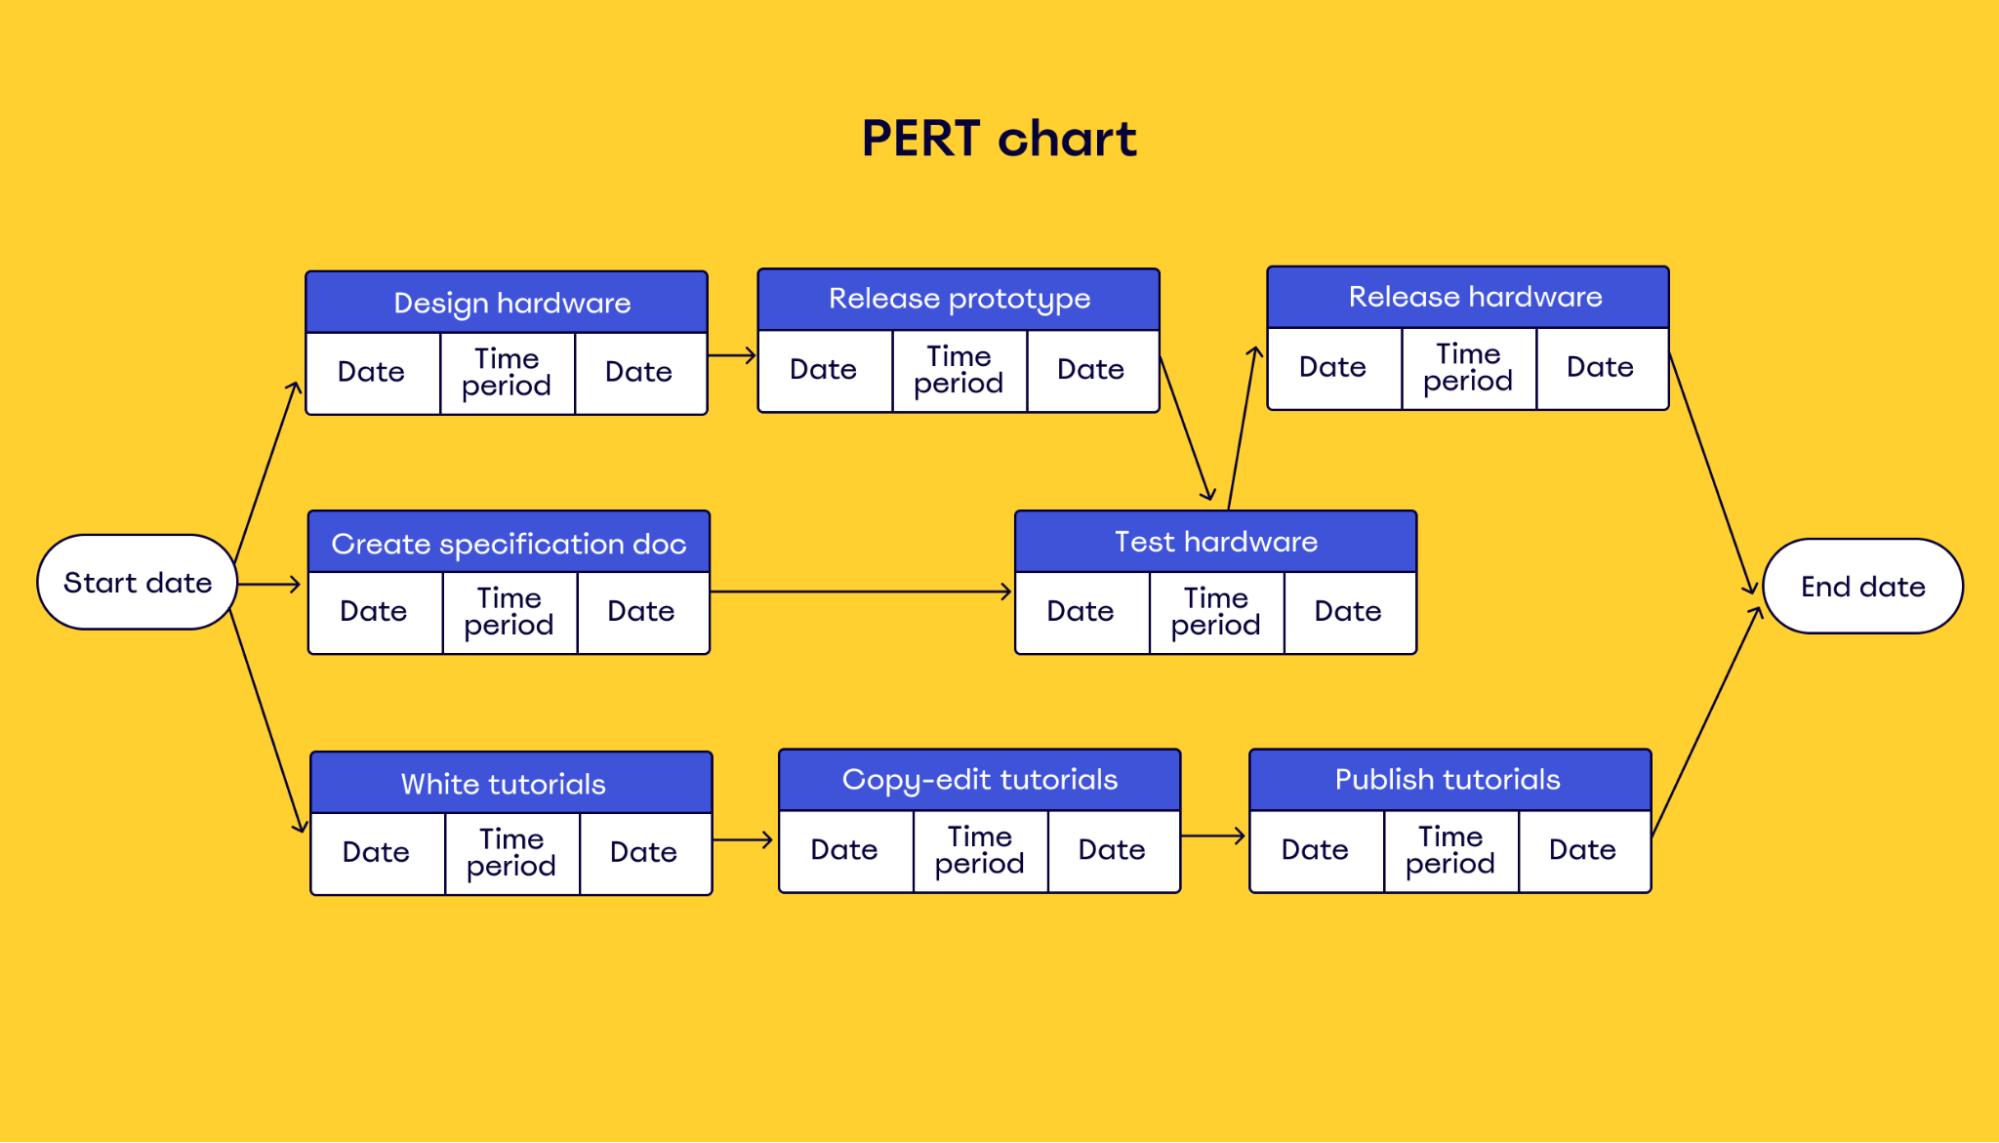 Example of a real-world PERT chart